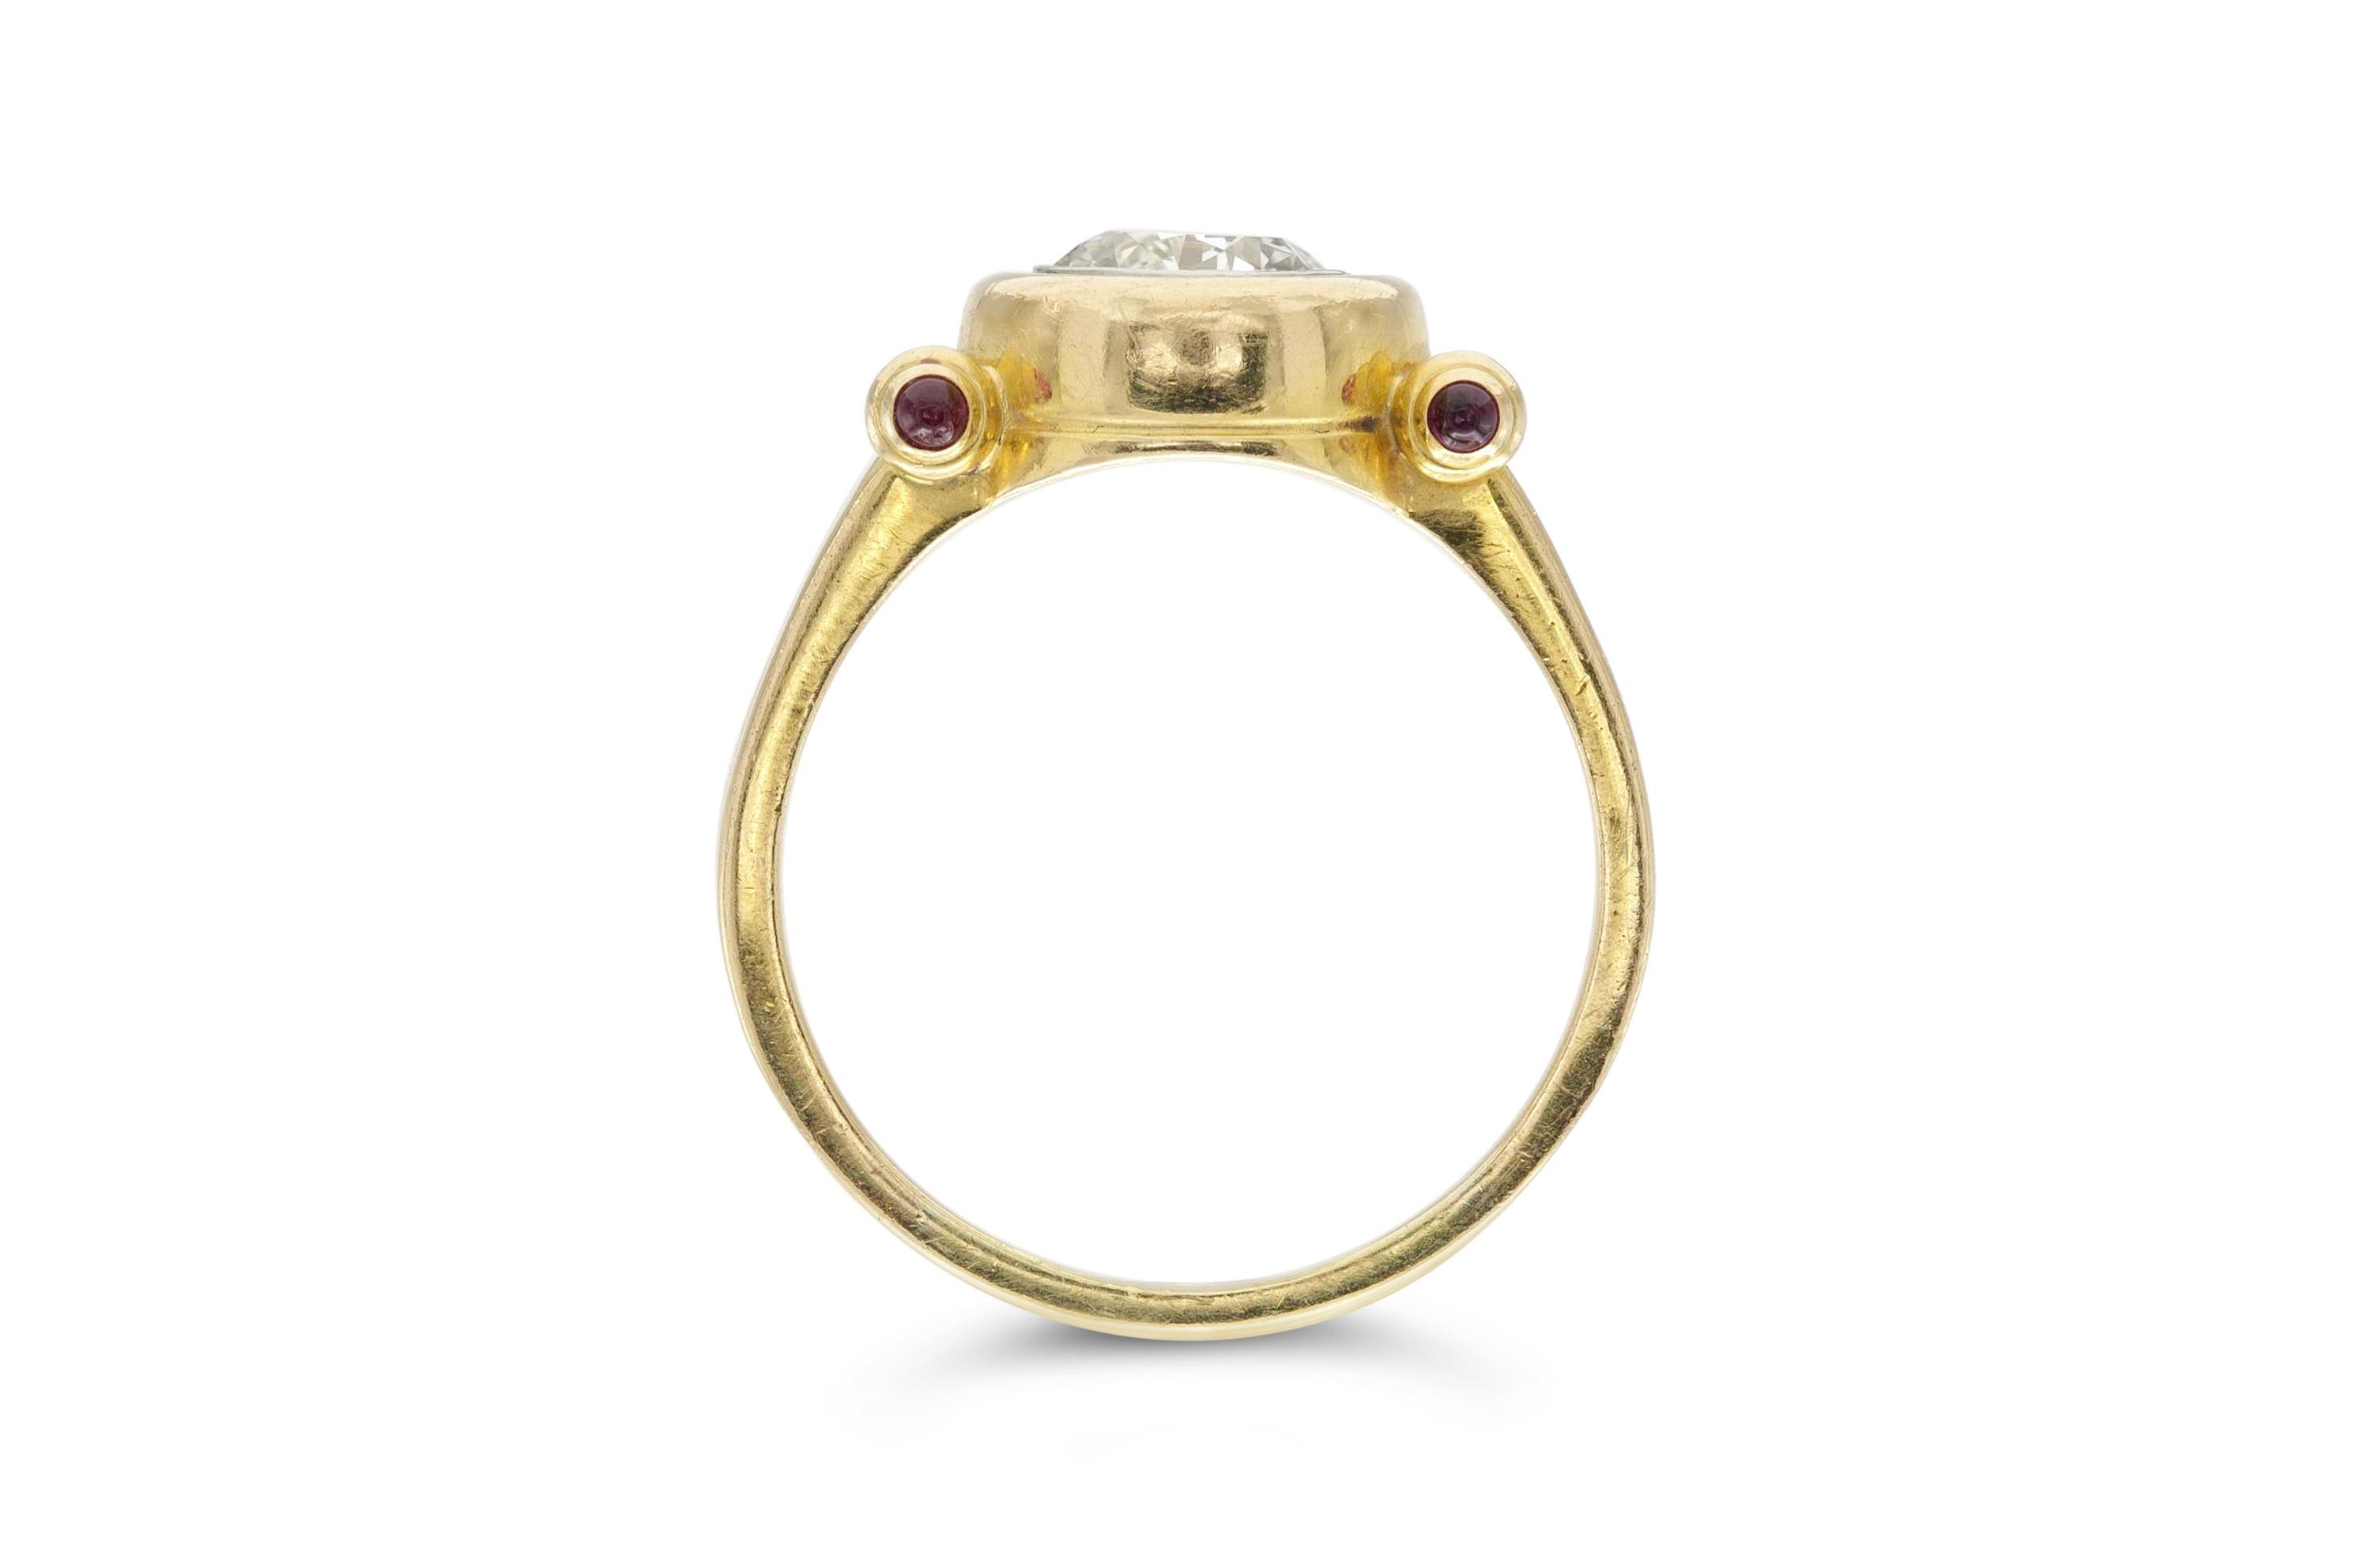 Finely crafted in 18K yellow gold featuring a center diamond weighing 1.90 carat with color J and VS1 clarity. The ring also features four small rubies.
Size 9 3/4, resizable.